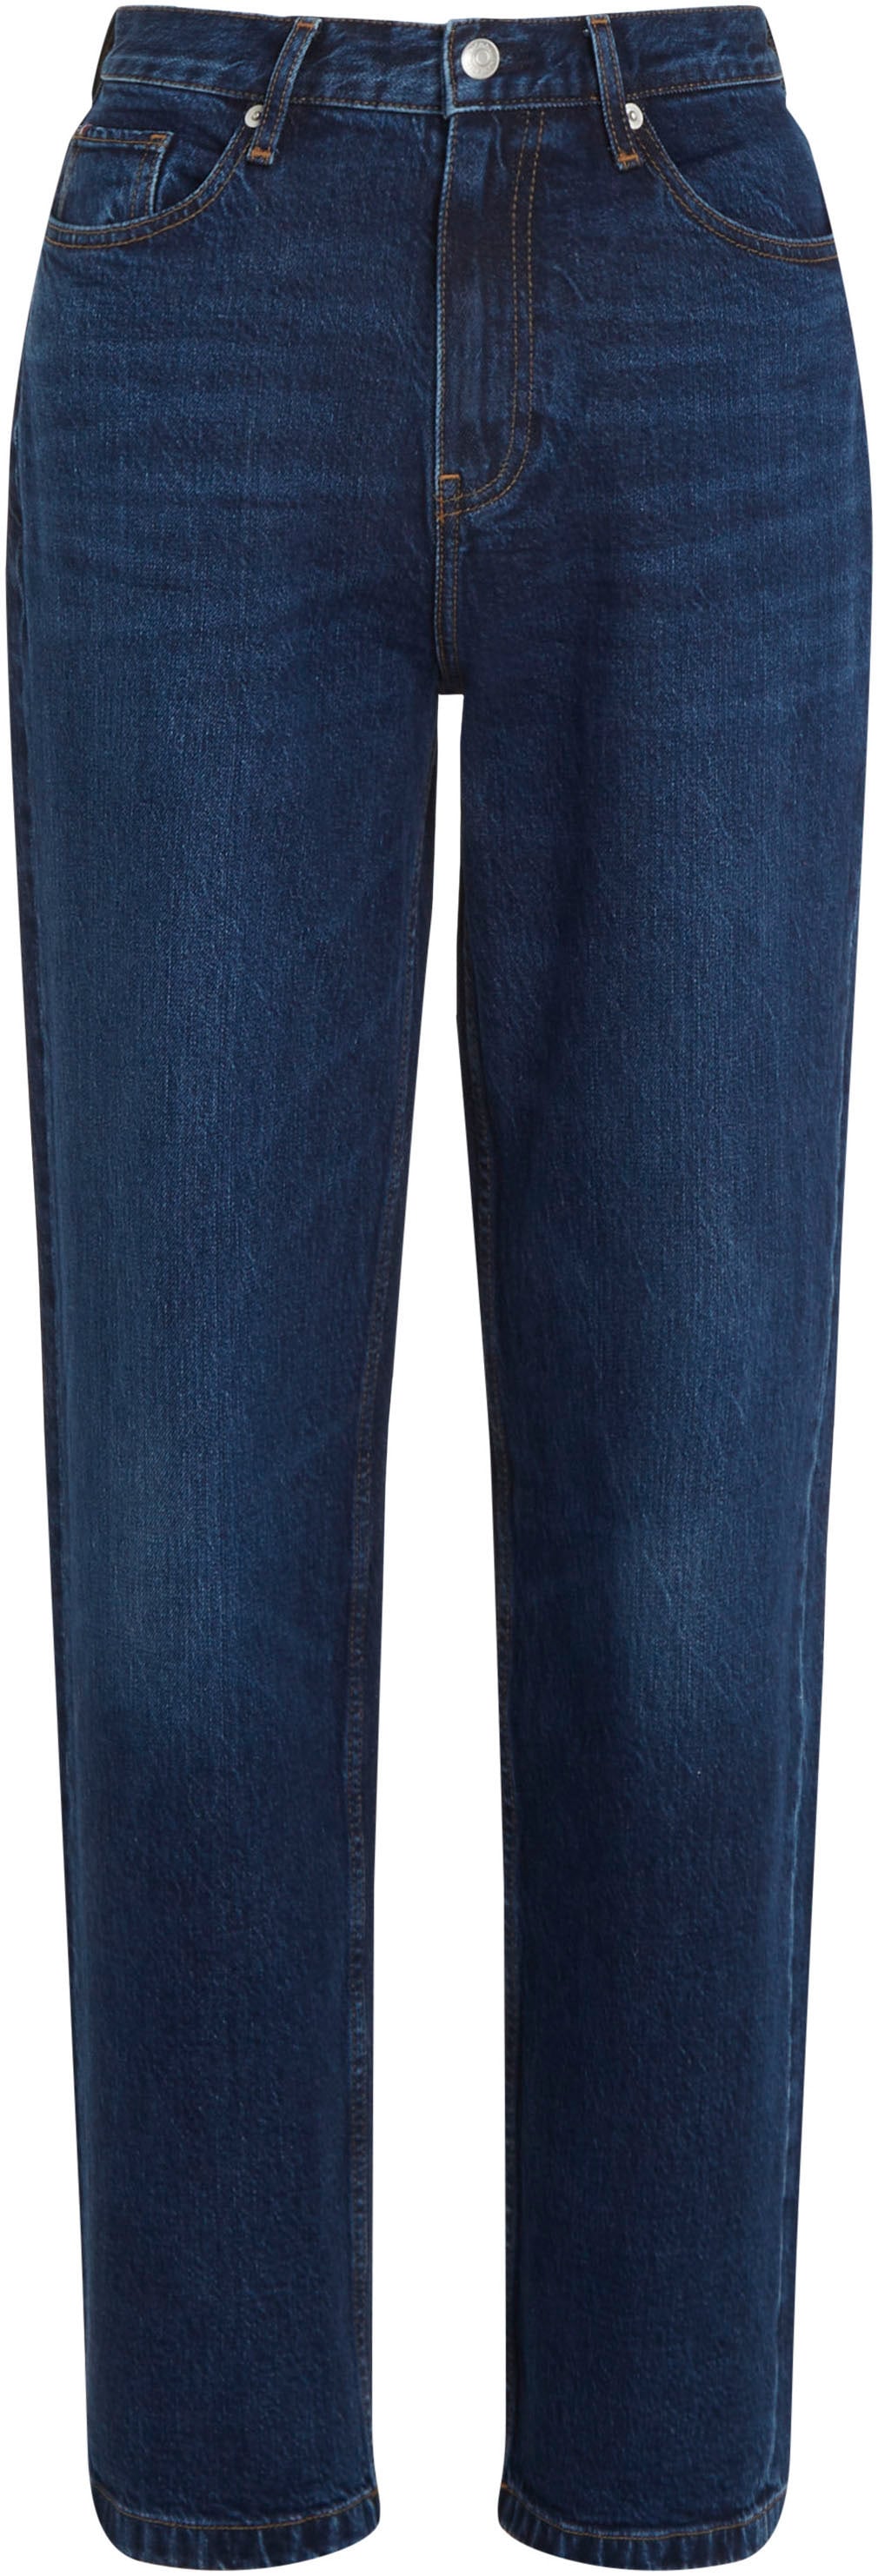 Tommy Hilfiger Relax-fit-Jeans weißer Waschung in online »RELAXED STRAIGHT HW kaufen PAM«